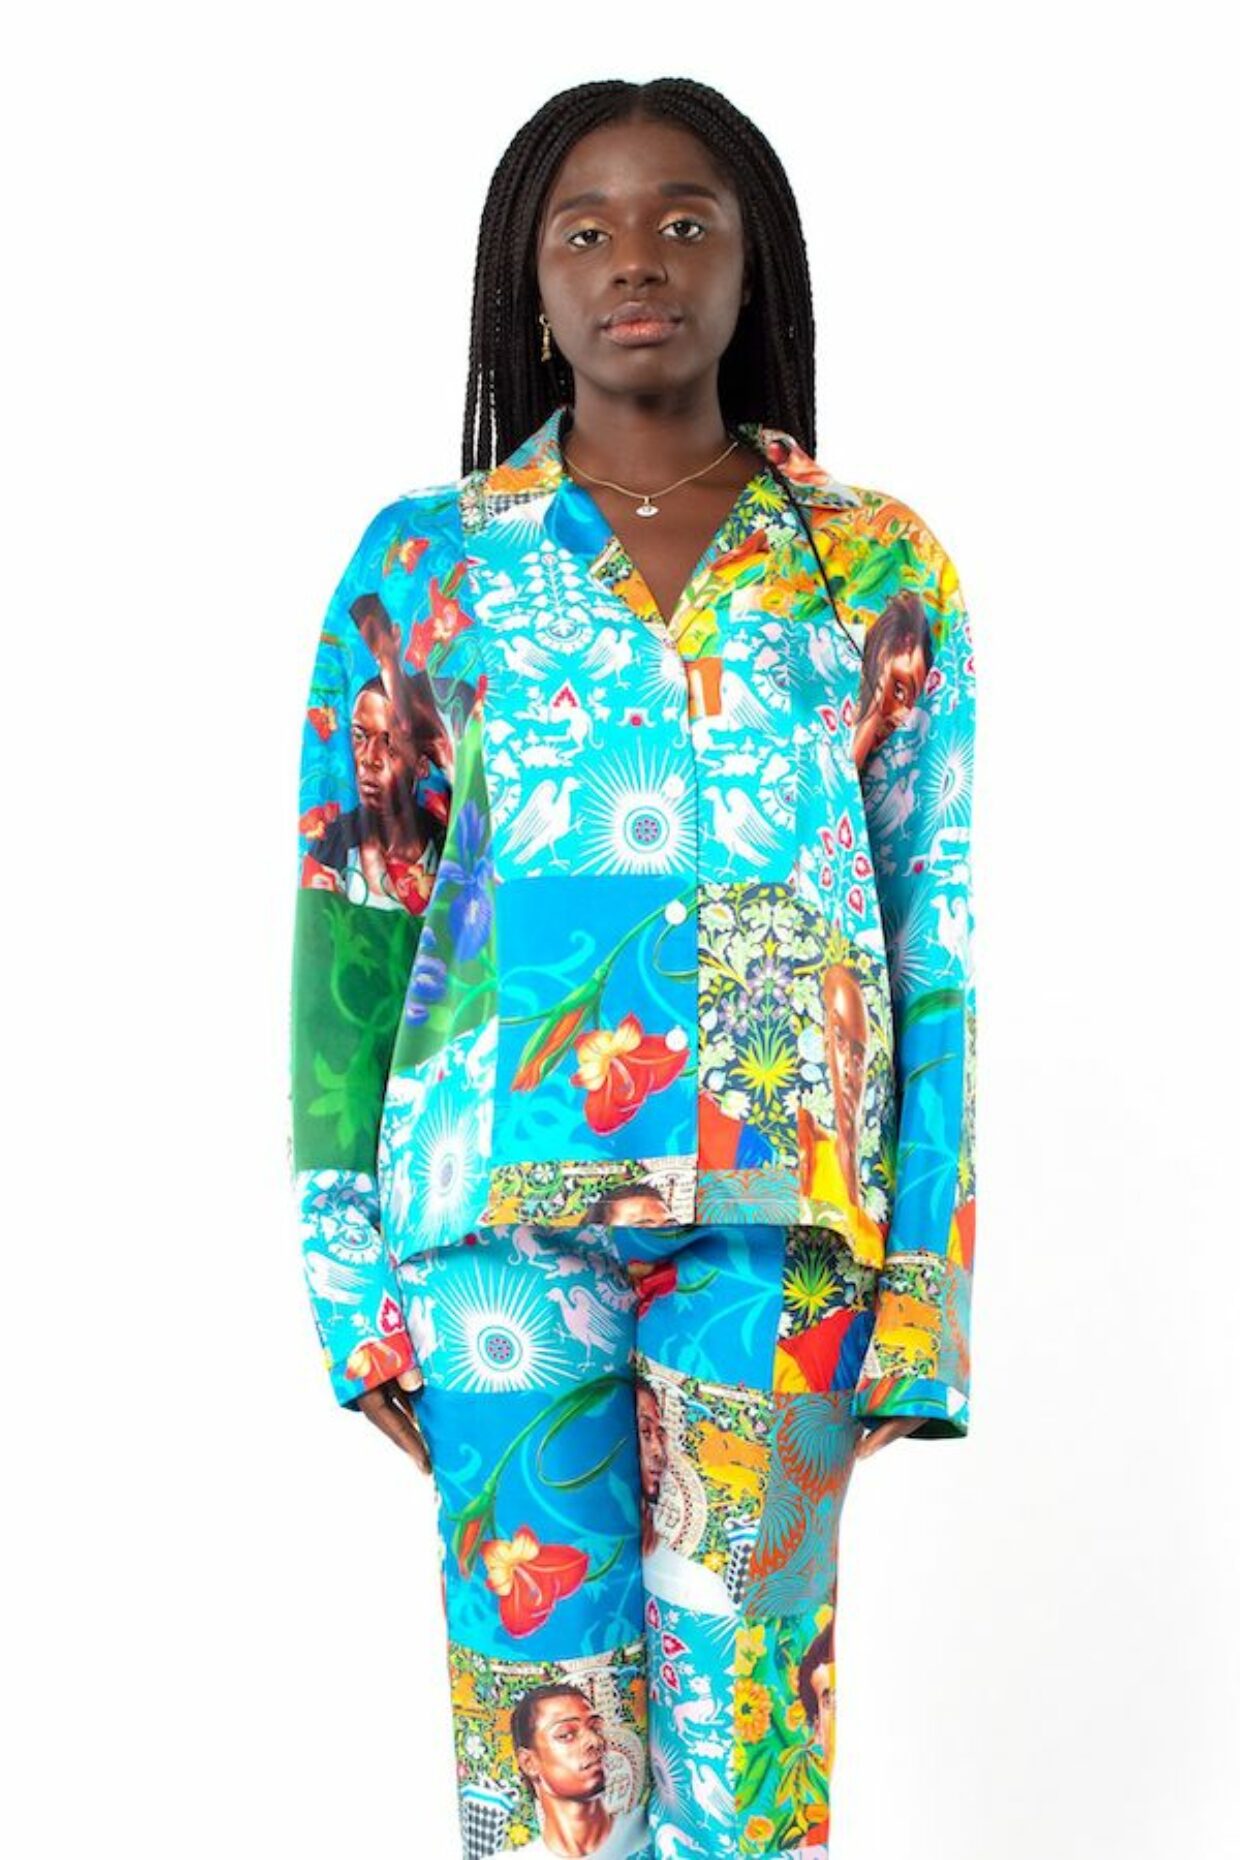 Artist Kehinde Wiley’s New Clothing Collection is a Visual Masterpiece | 5